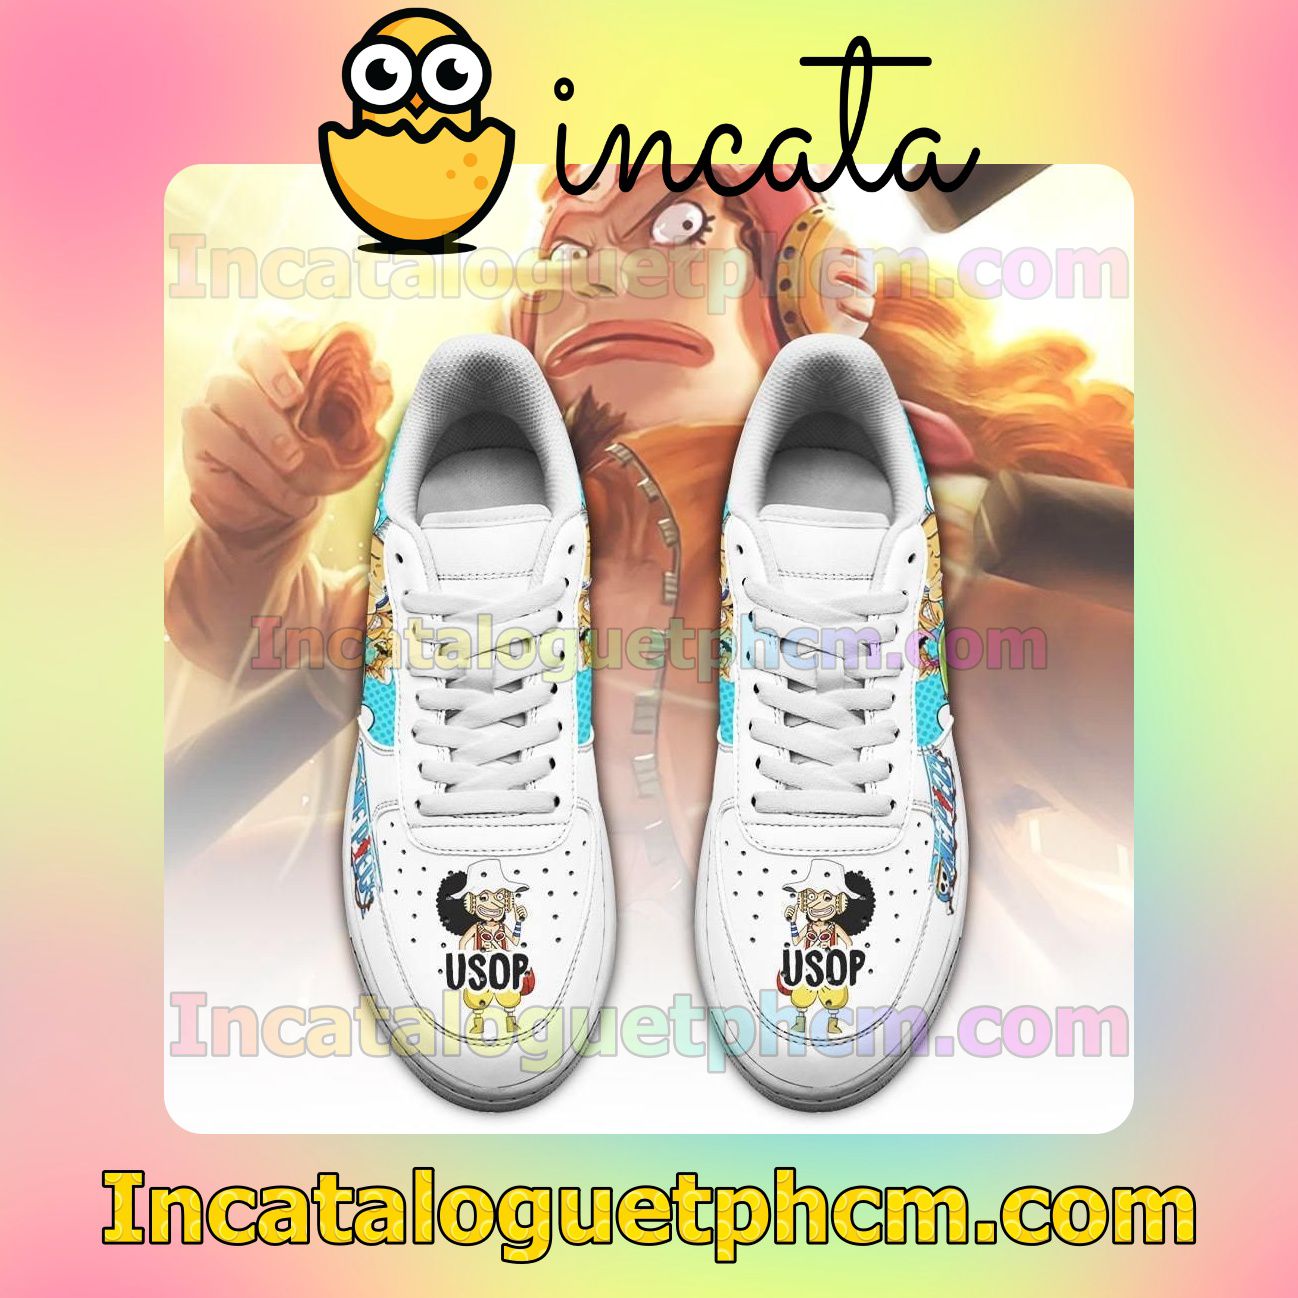 Etsy Usop One Piece Anime Nike Low Shoes Sneakers